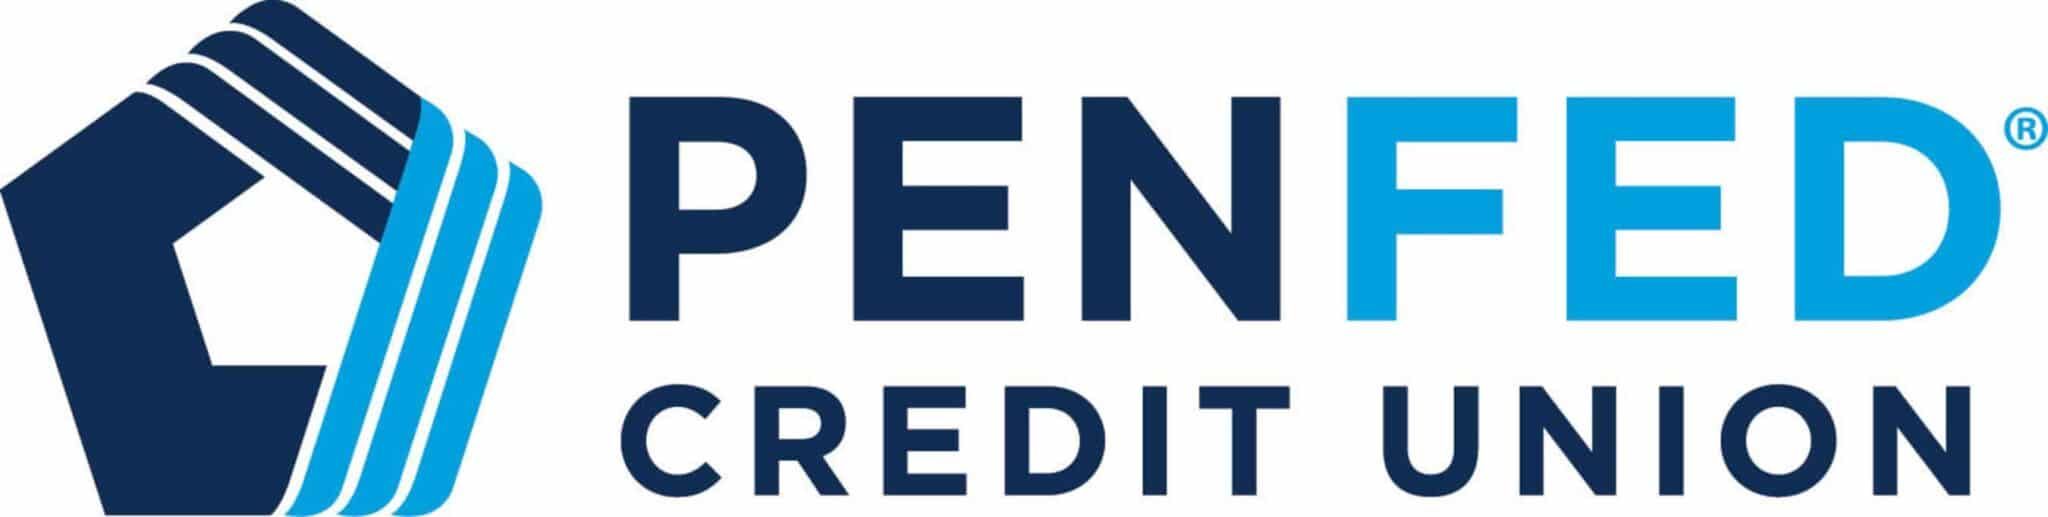 military checking accounts: PenFed Credit Union